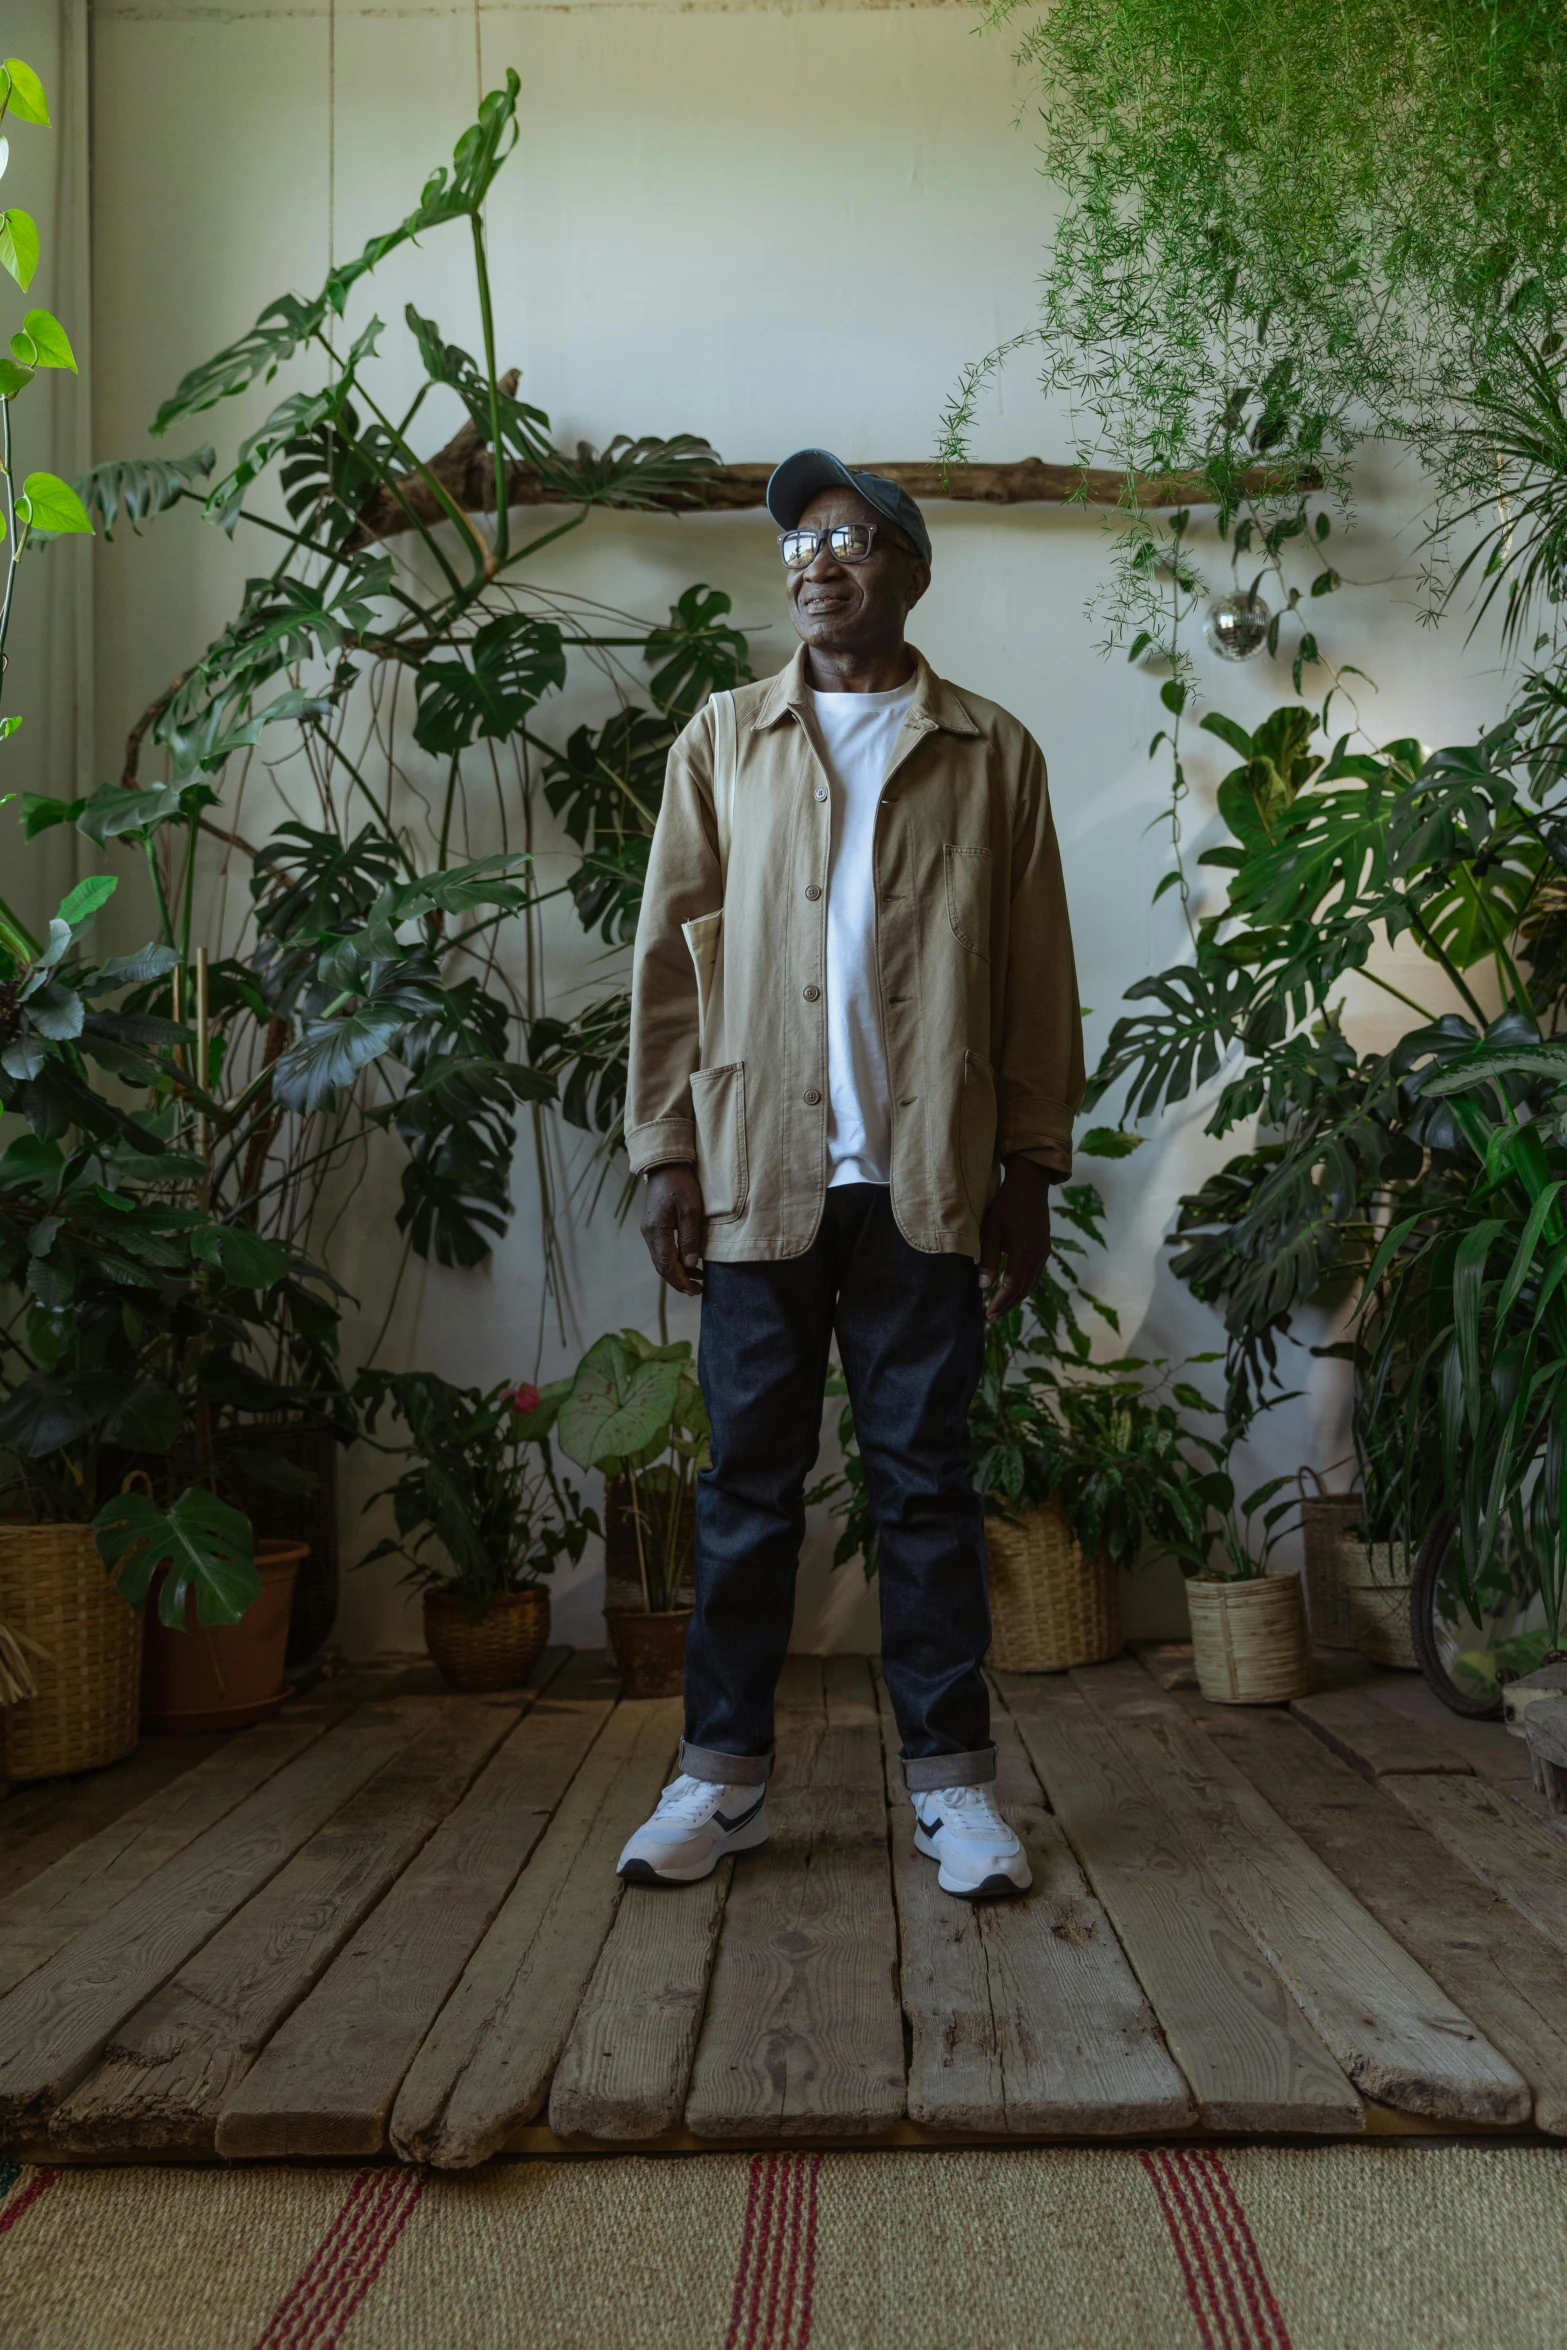 a man standing in a room filled with potted plants, an album cover, inspired by Afewerk Tekle, unsplash, wearing a linen shirt, he is wearing a trenchcoat, blind brown man, lush surroundings